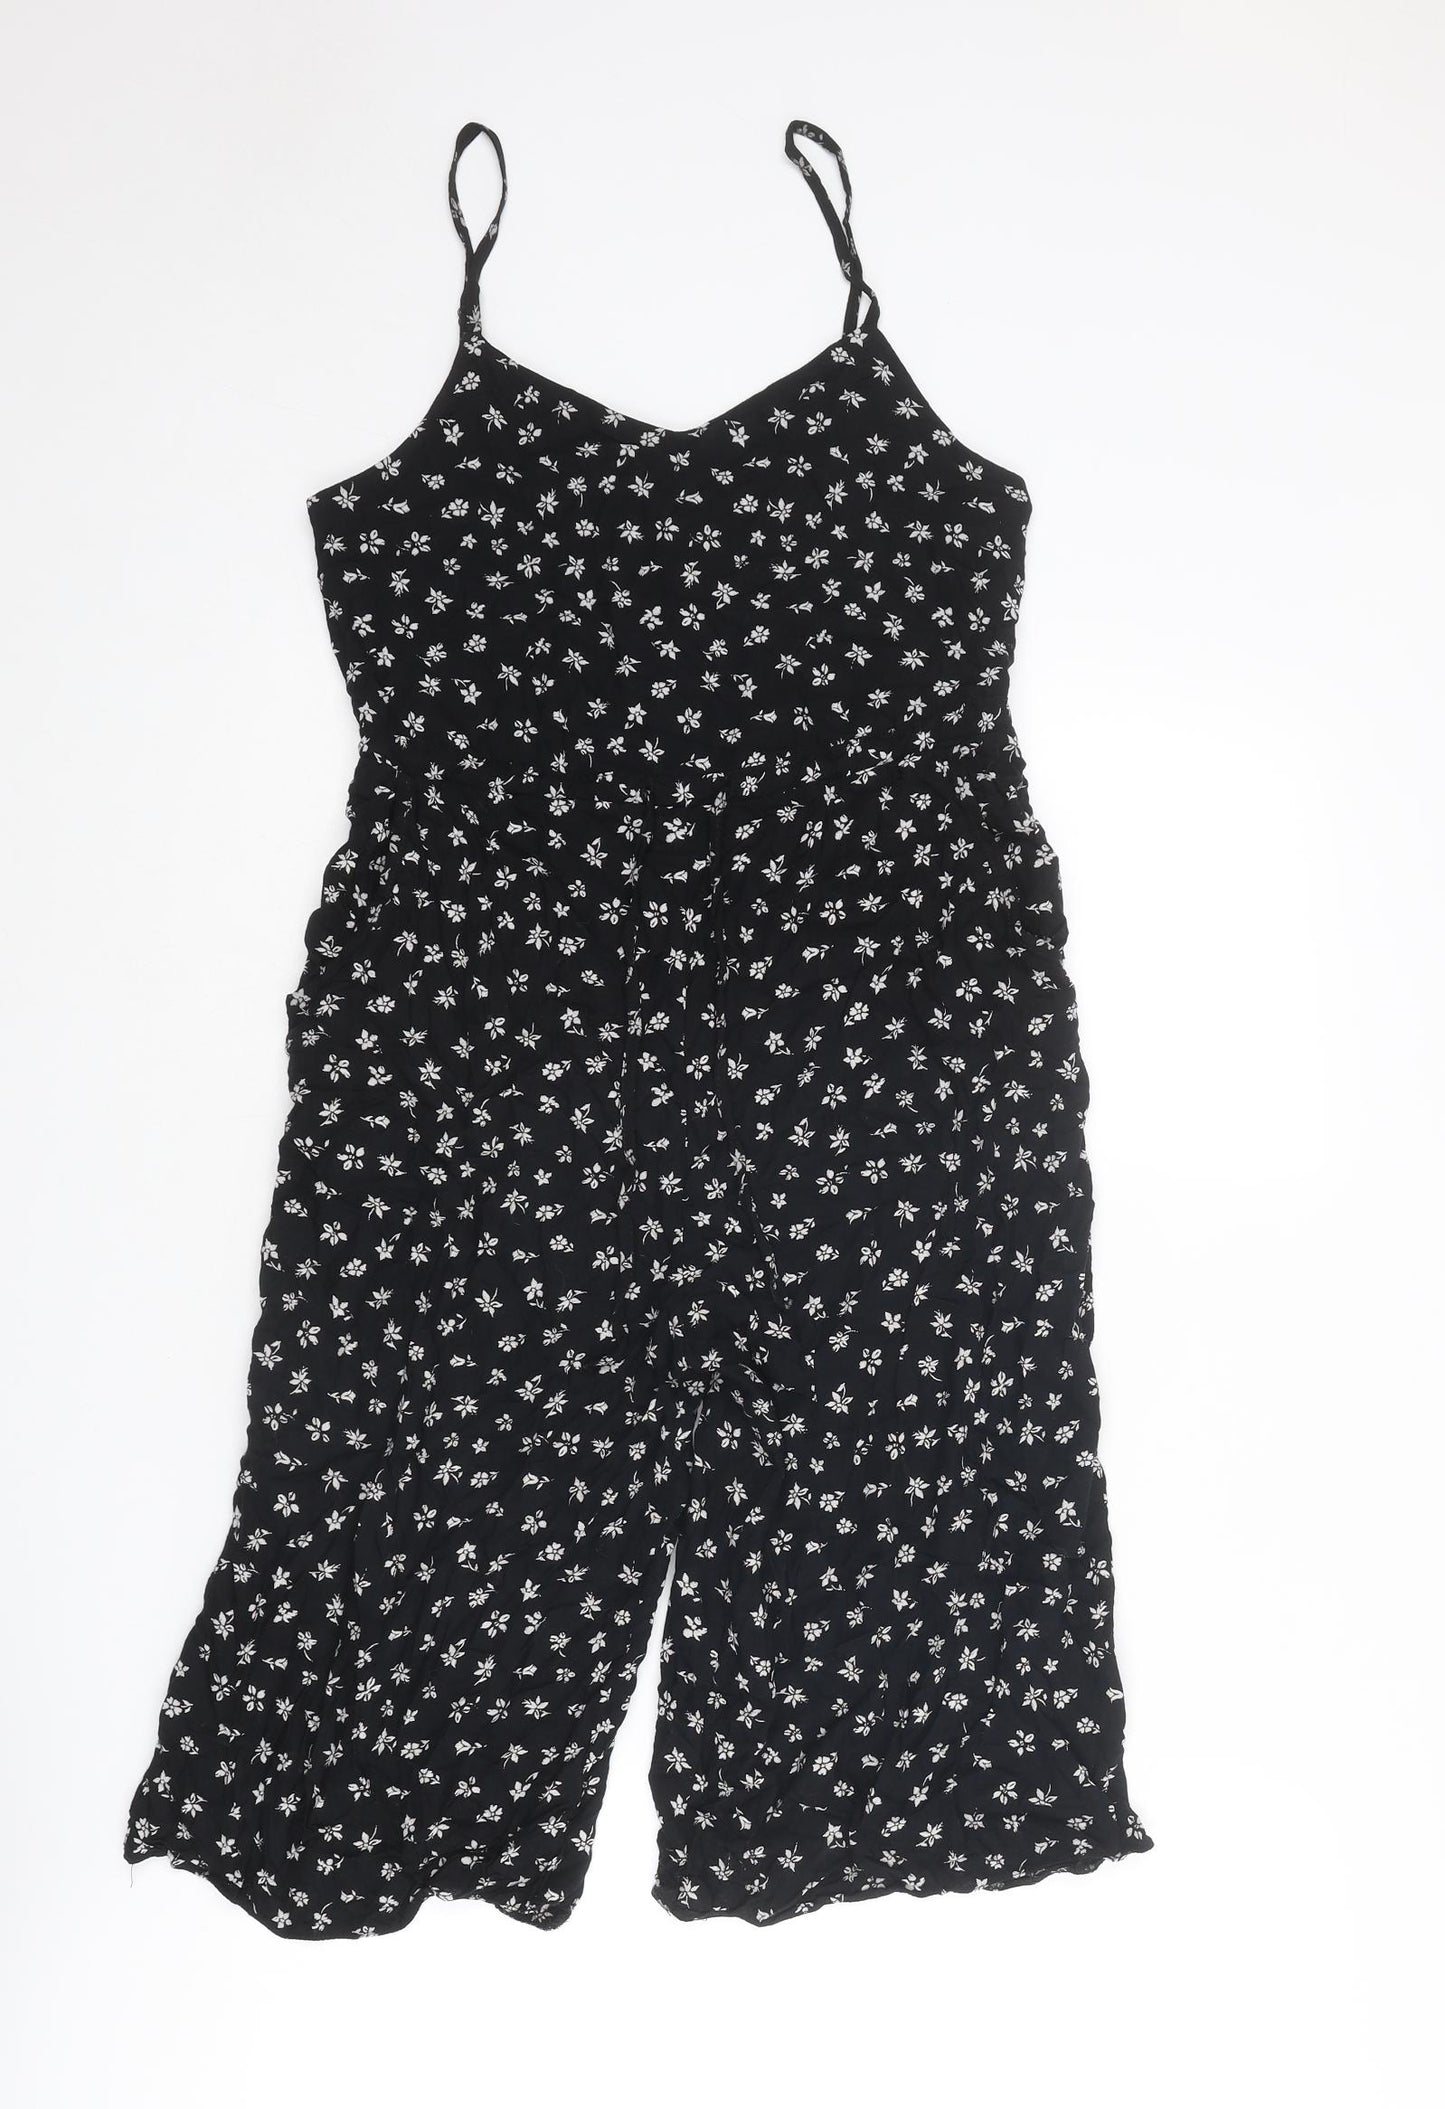 New Look Womens Black Floral Viscose Jumpsuit One-Piece Size 8 L14 in Zip